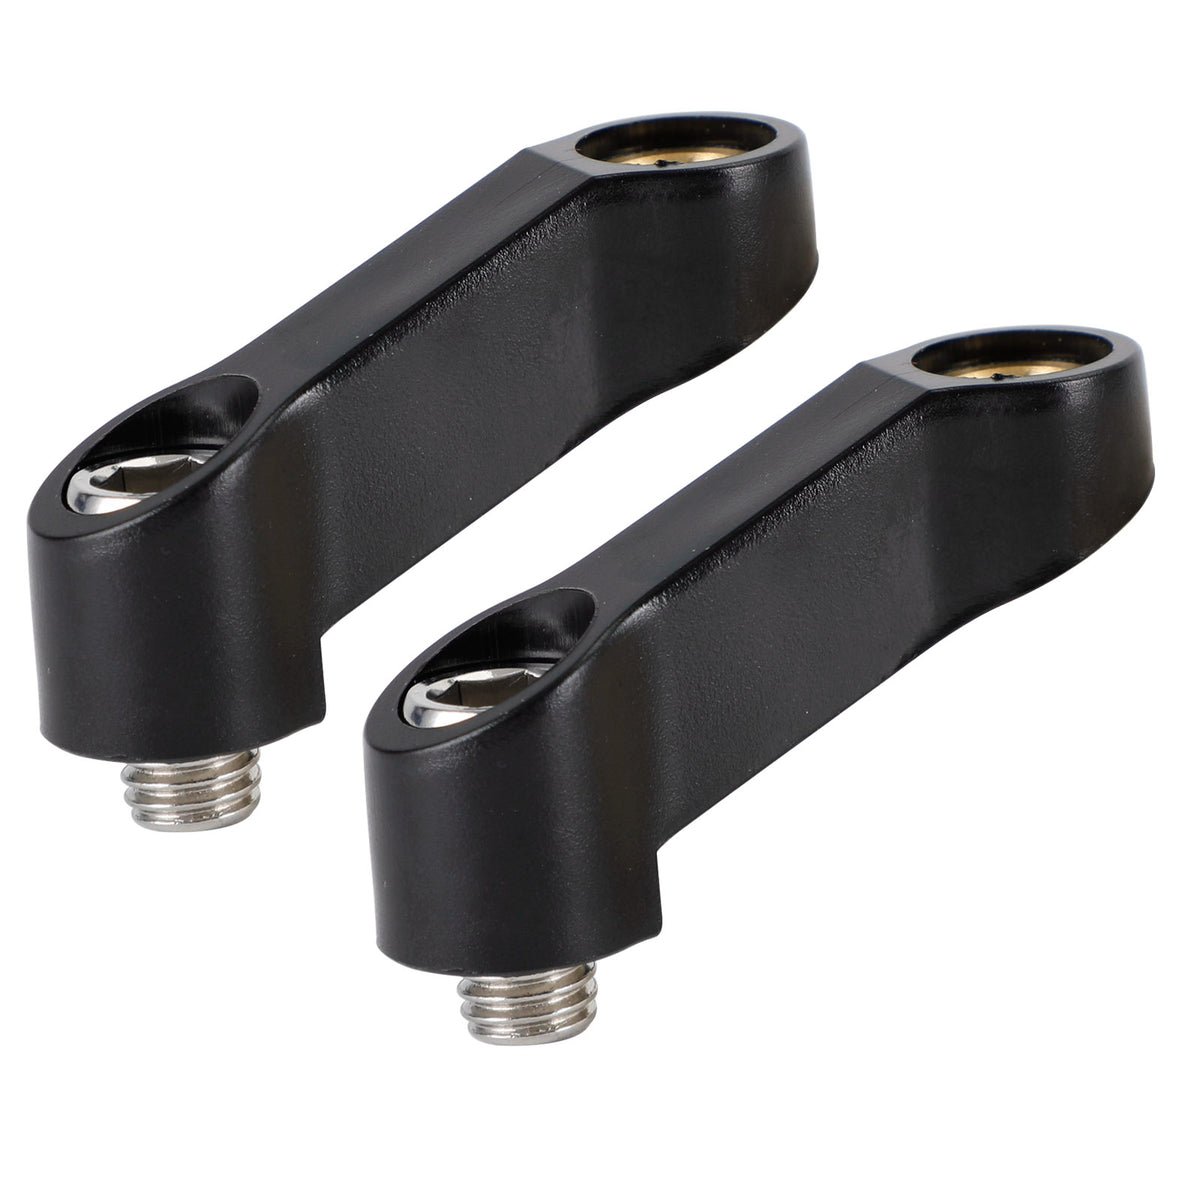 M10x1.5mm ABS Mirror Extender Extension Riser For BMW R1200GS F 900 S 1000 R/XR